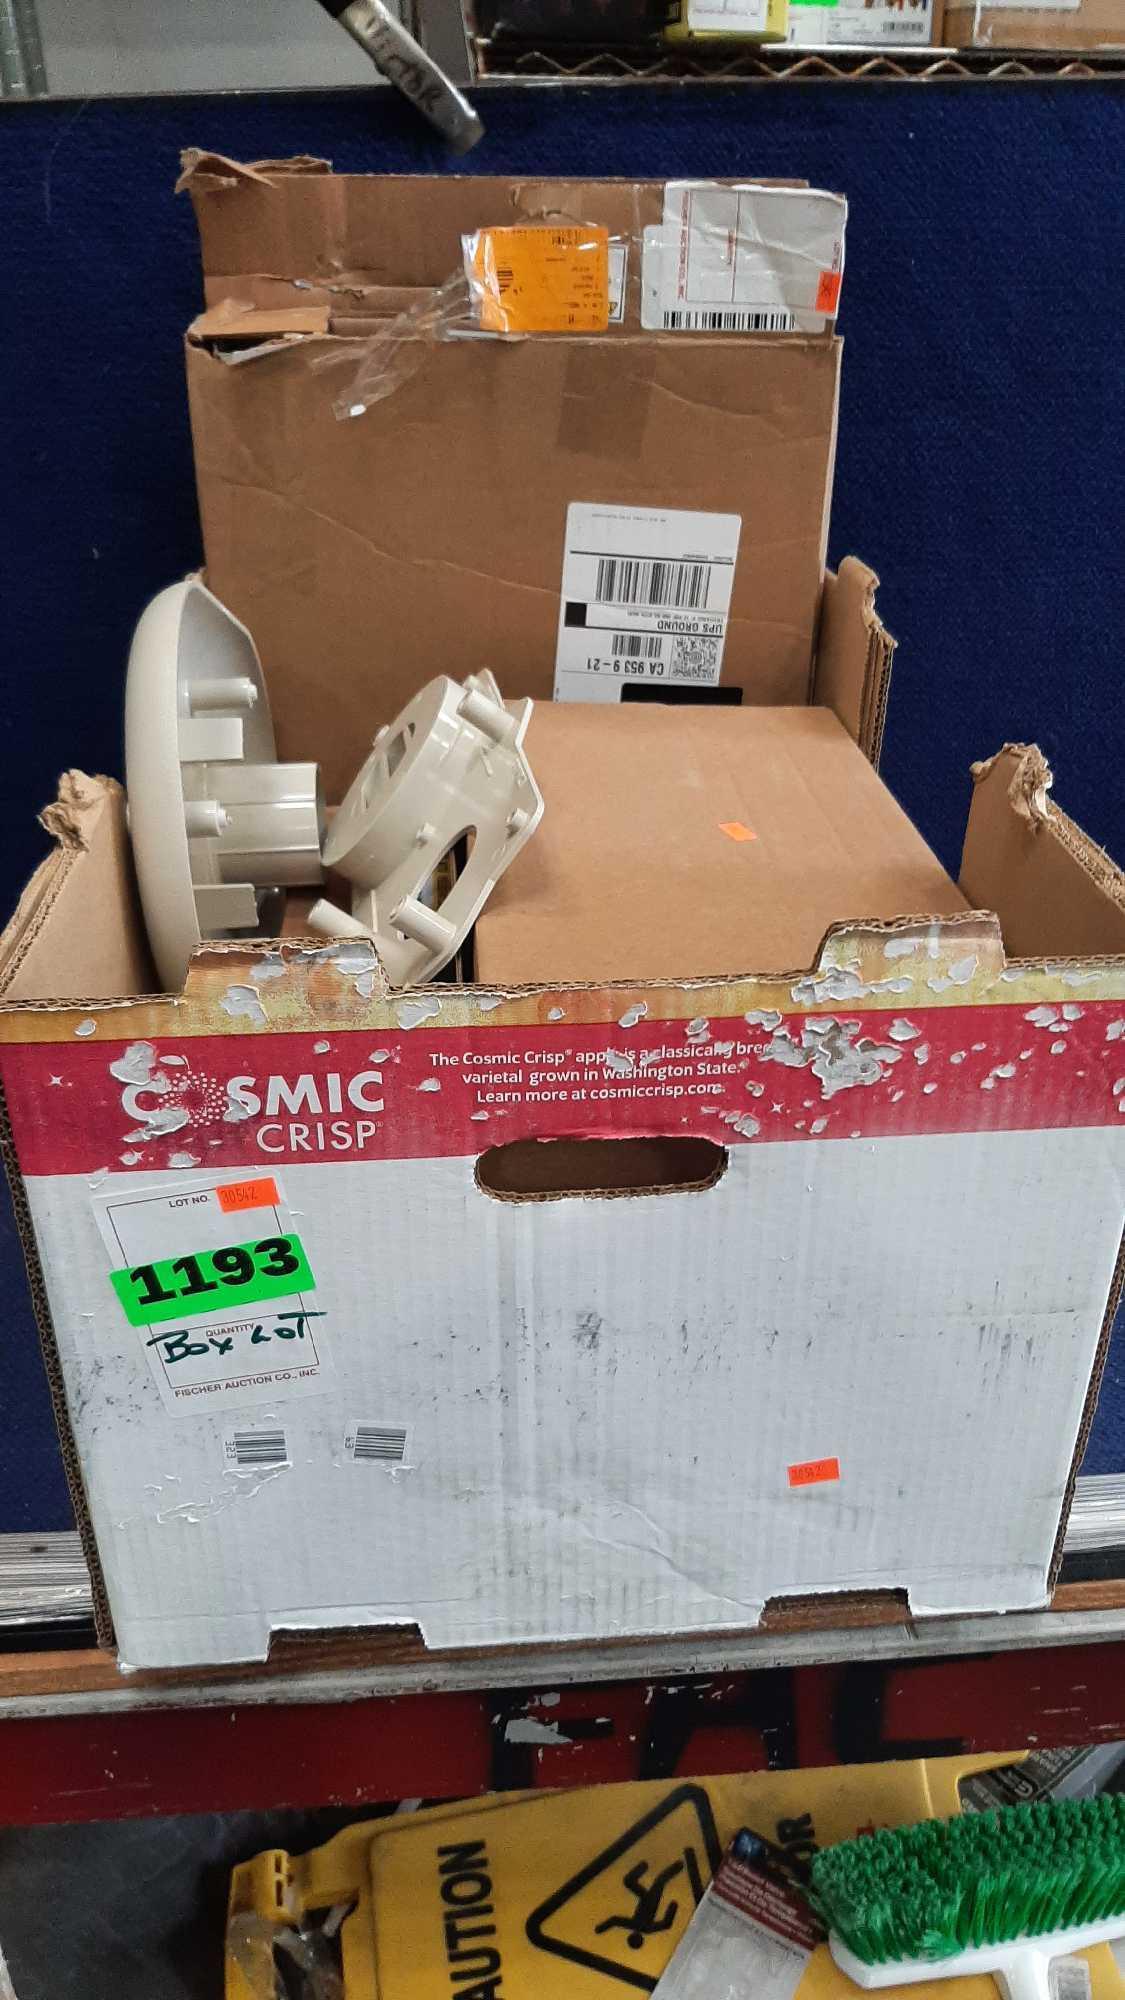 Box Lot of Tankless Water Heater Items & Metal Recessed Dryer Vent Box